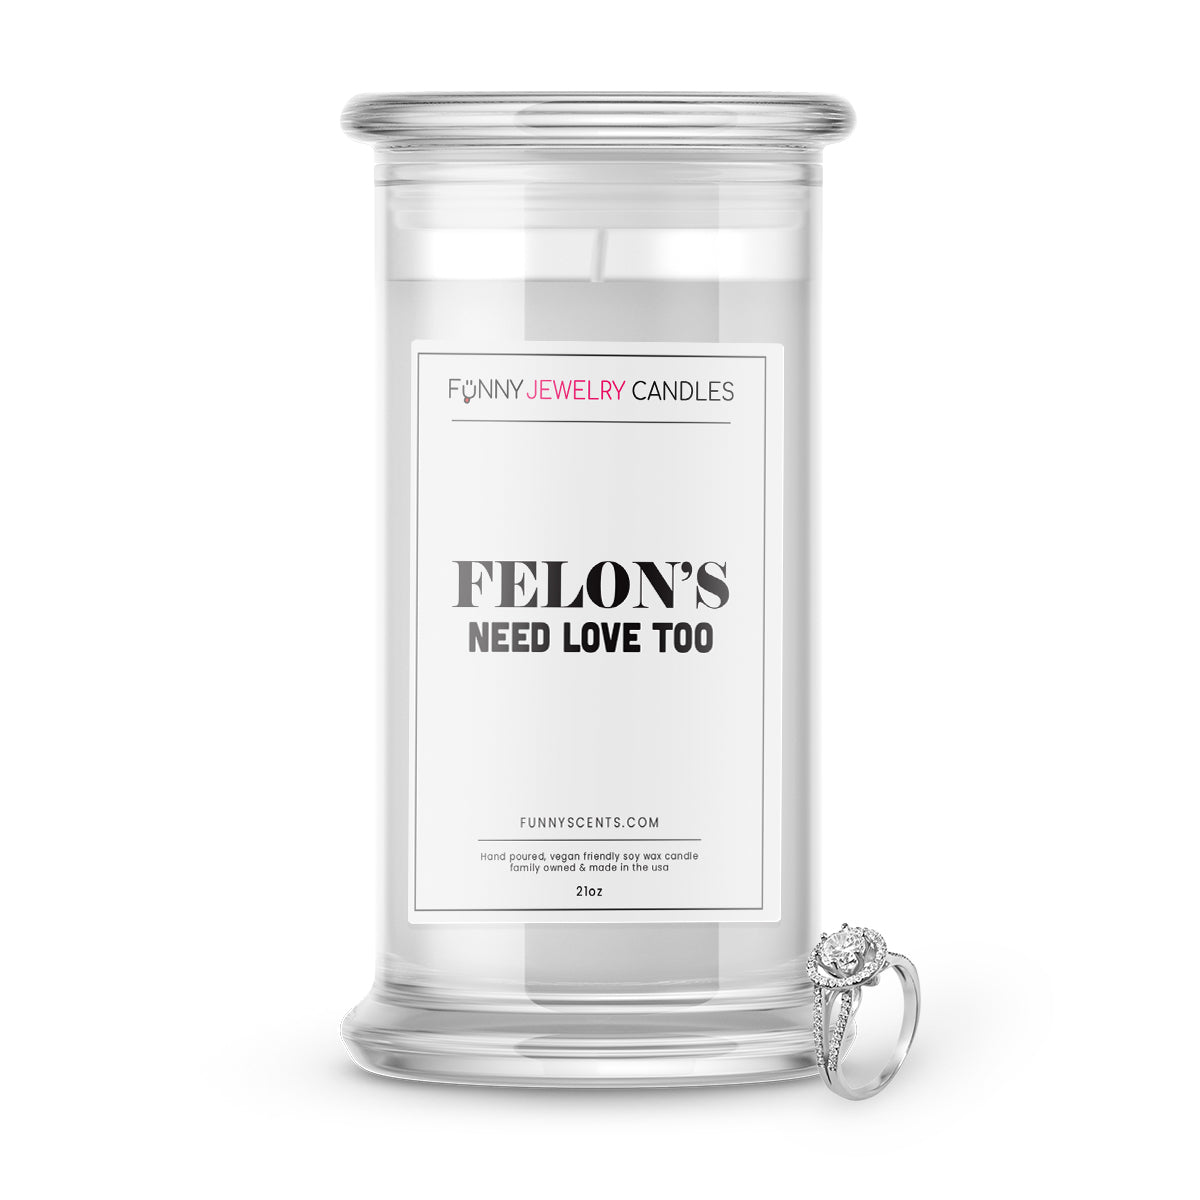 Felon's Need a Love Too Jewelry Funny Candles